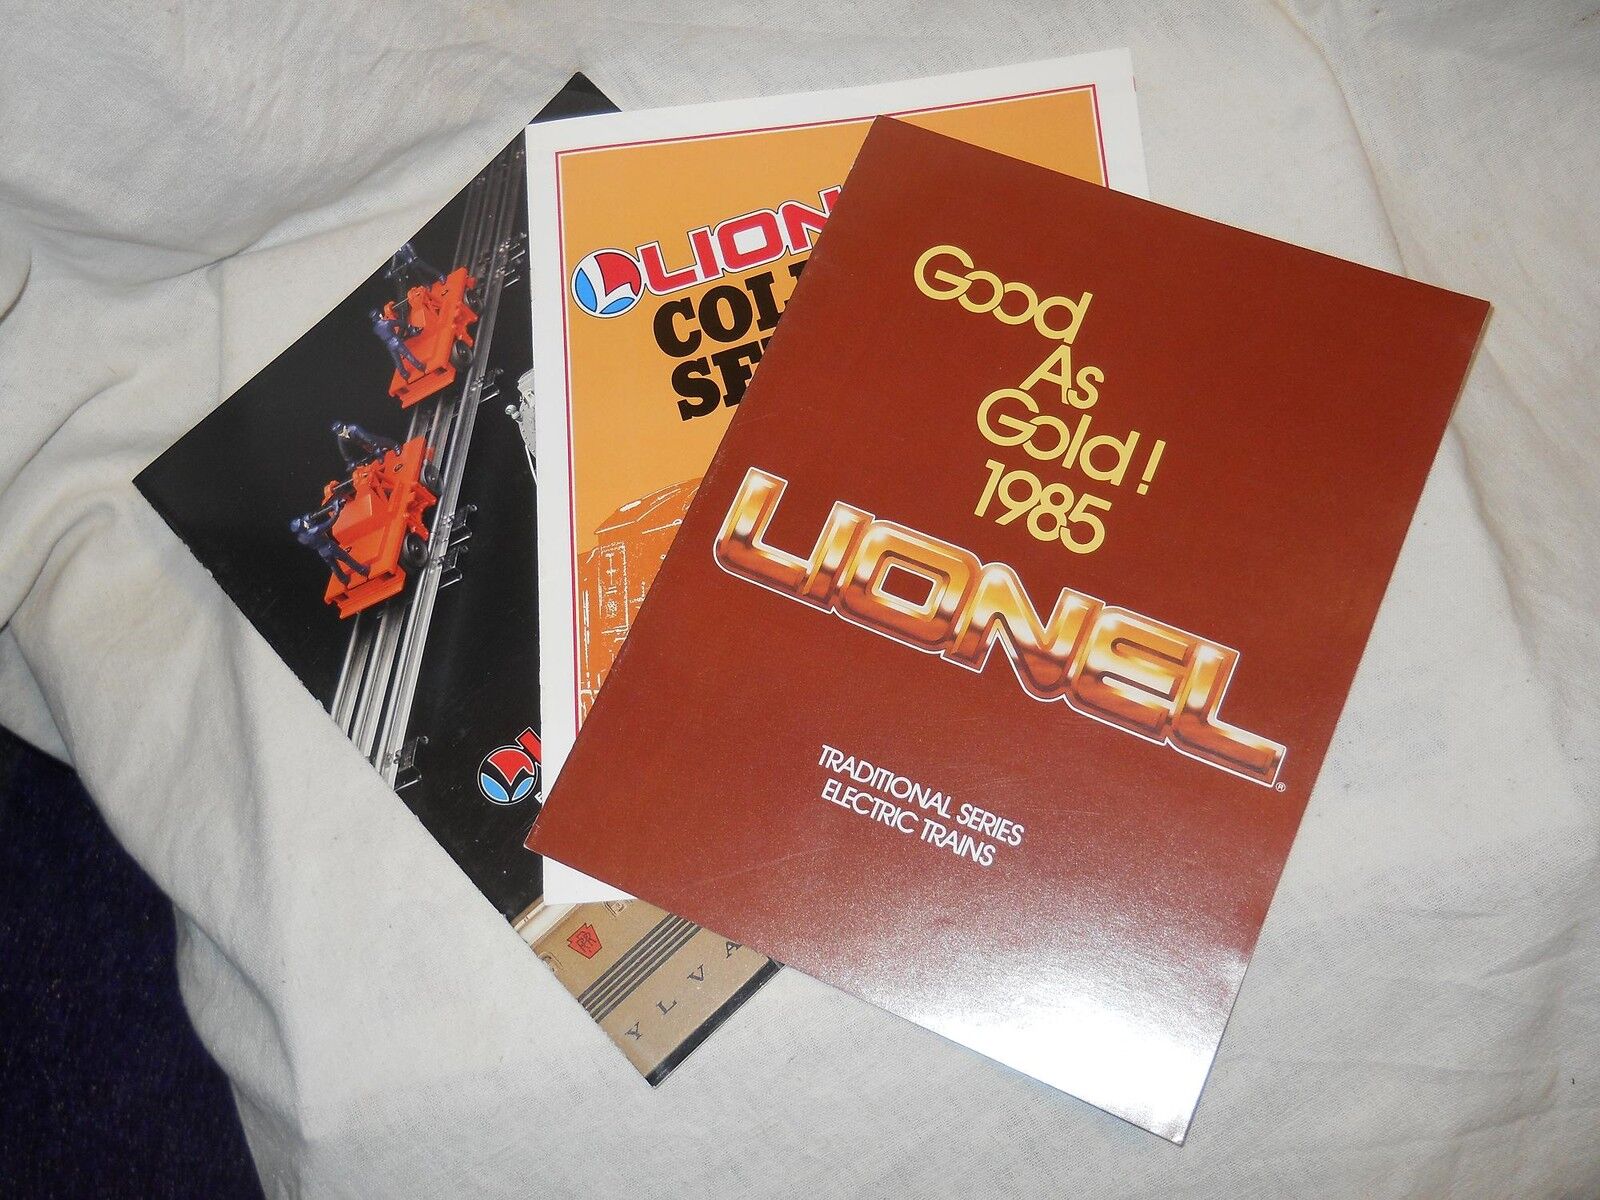  3 Lionel Catalogs:  1985 Traditional Series, 1986 Collector Series & 1987 Elect